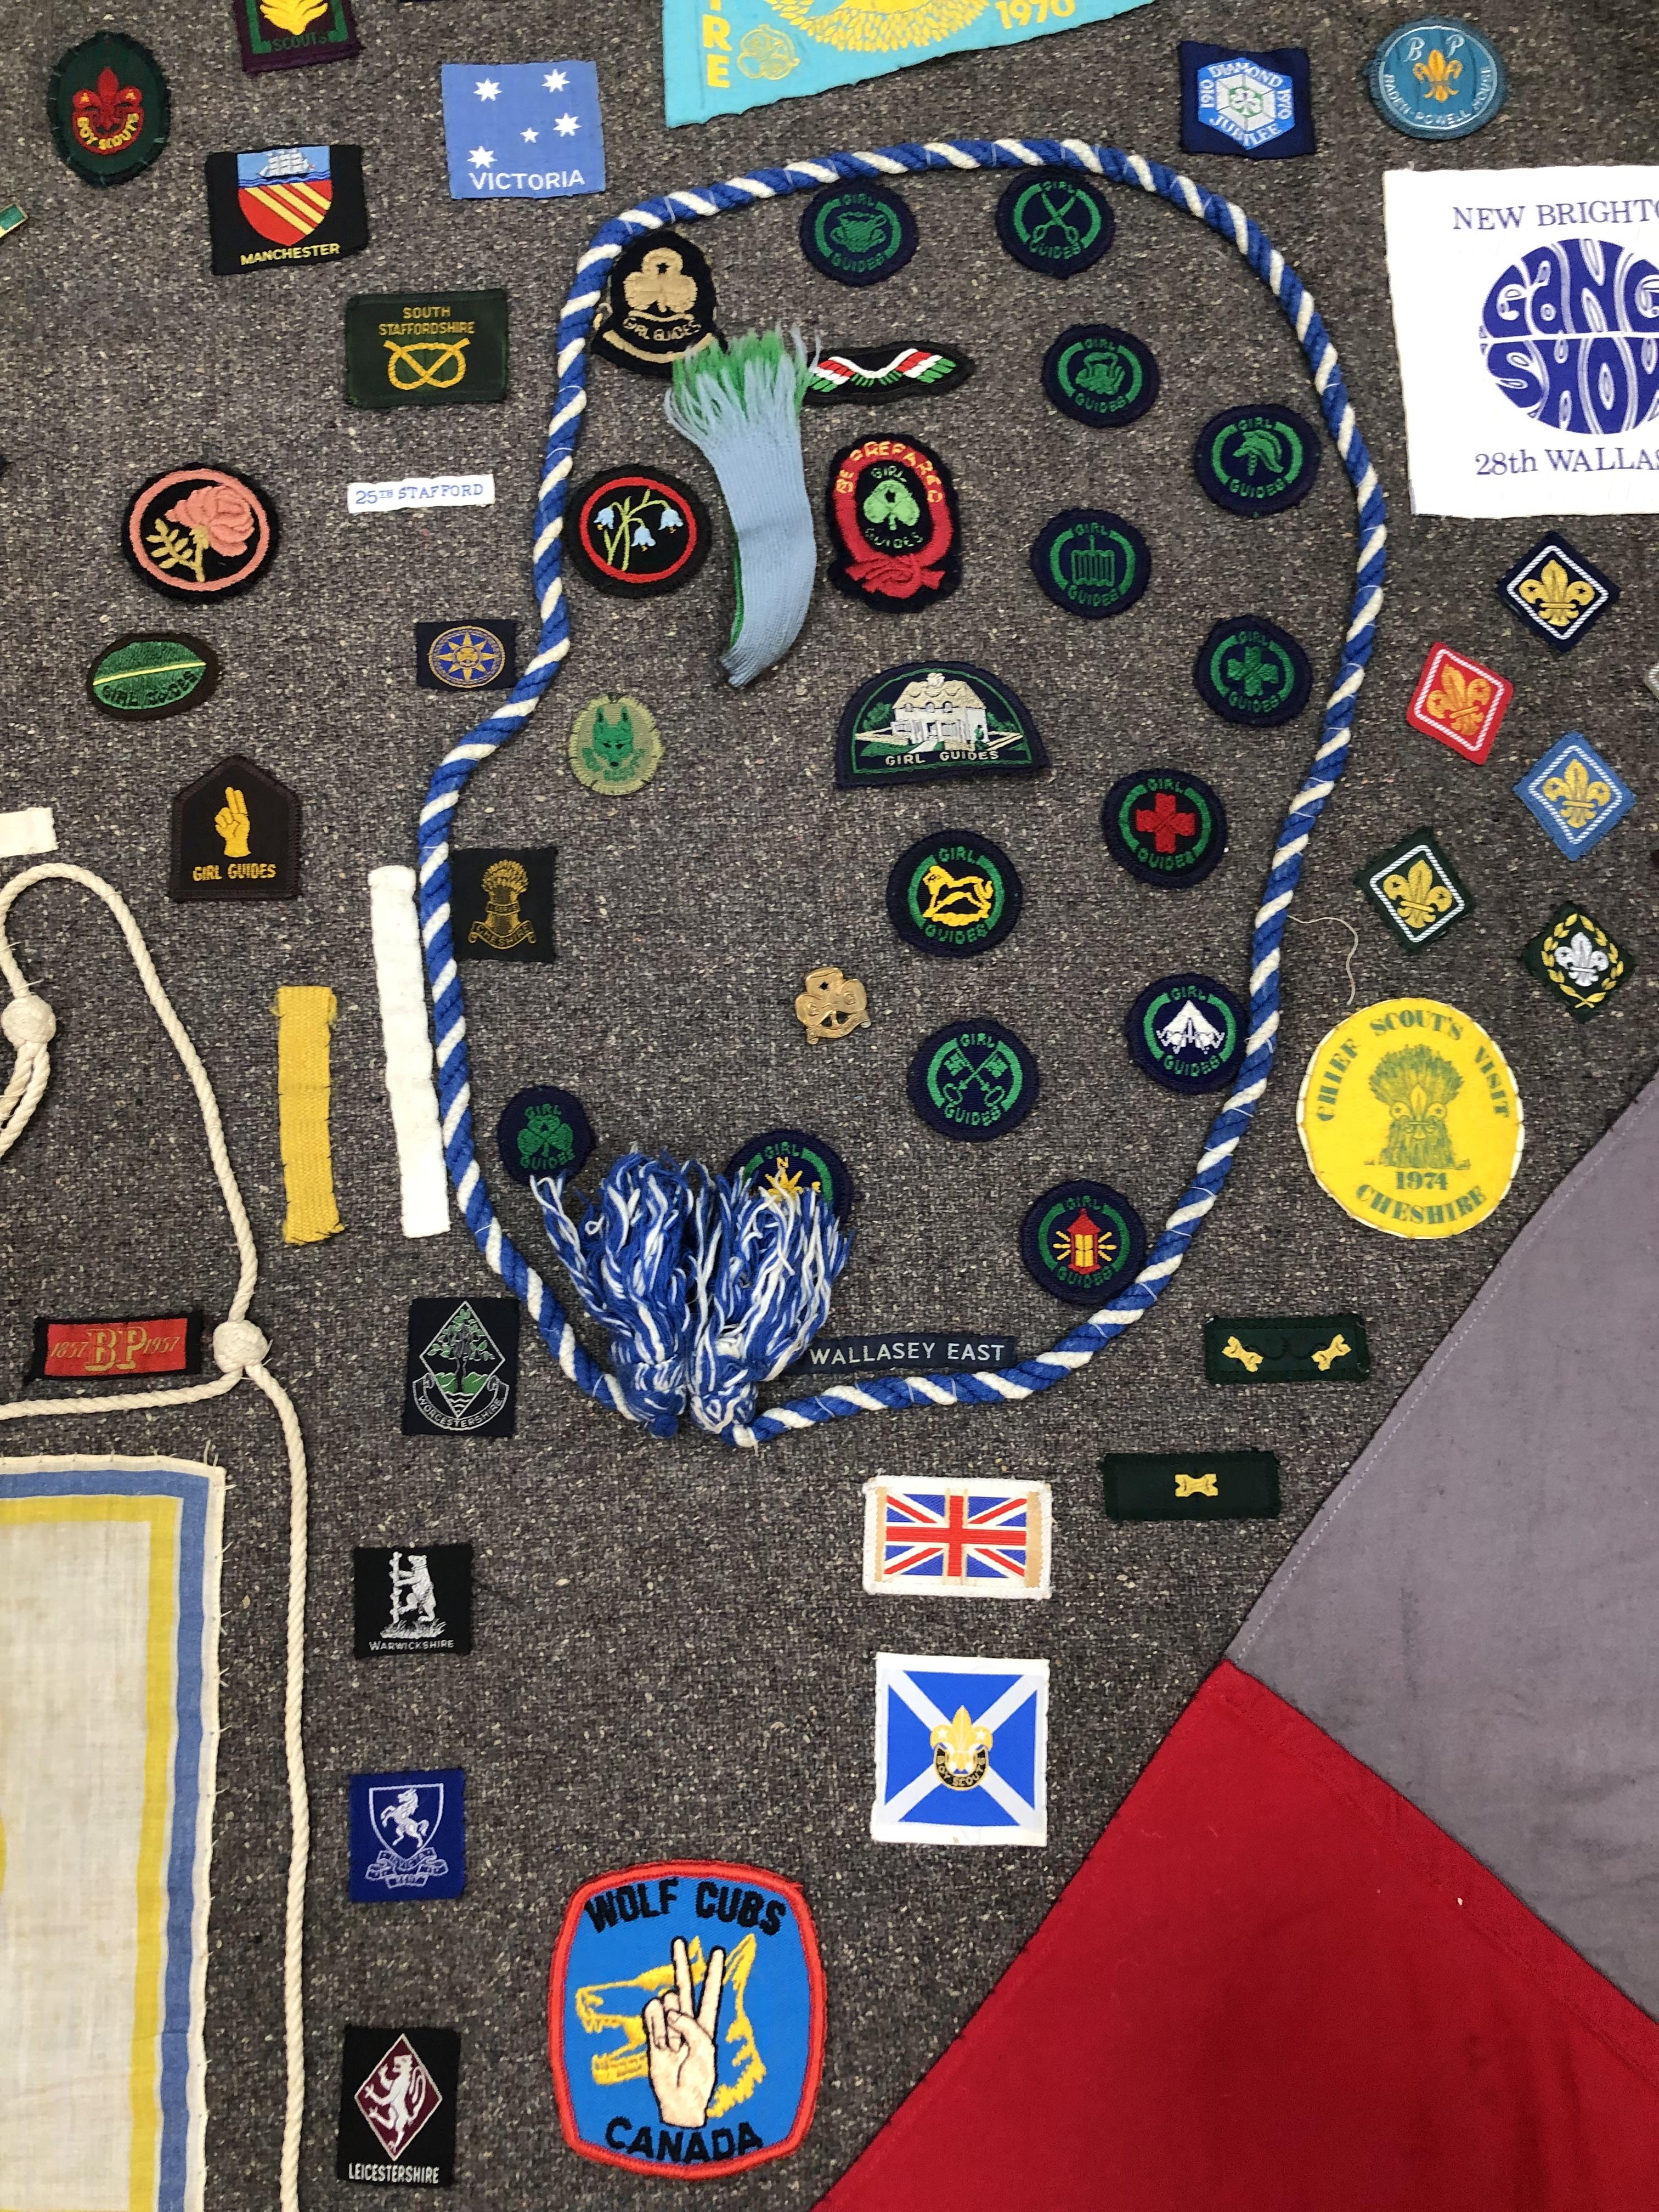 A GIRL GUIDE BLANKET WITH VINTAGE BADGES AND MEMORABILIA - Image 4 of 6